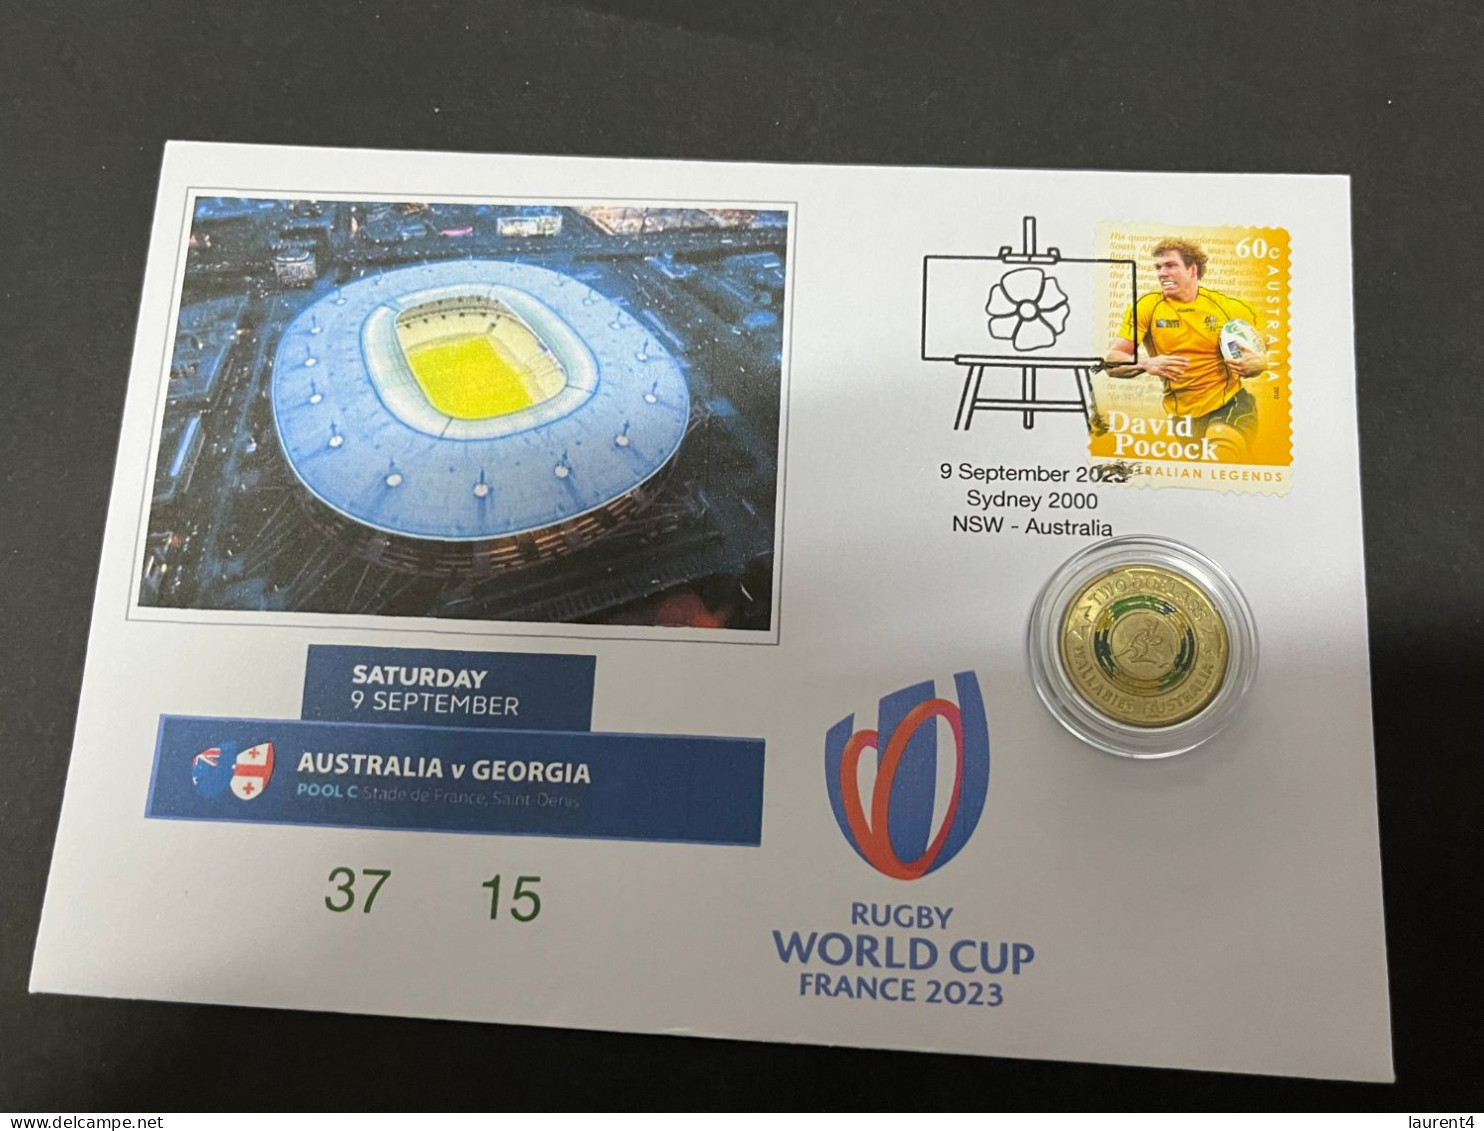 12-9-2023 (4 T 52) France 2023 Rugby World Cup - Australia (37) V Georgia  (15) 8-9-2023 (Paris) + Rugby Coin - 2 Dollars